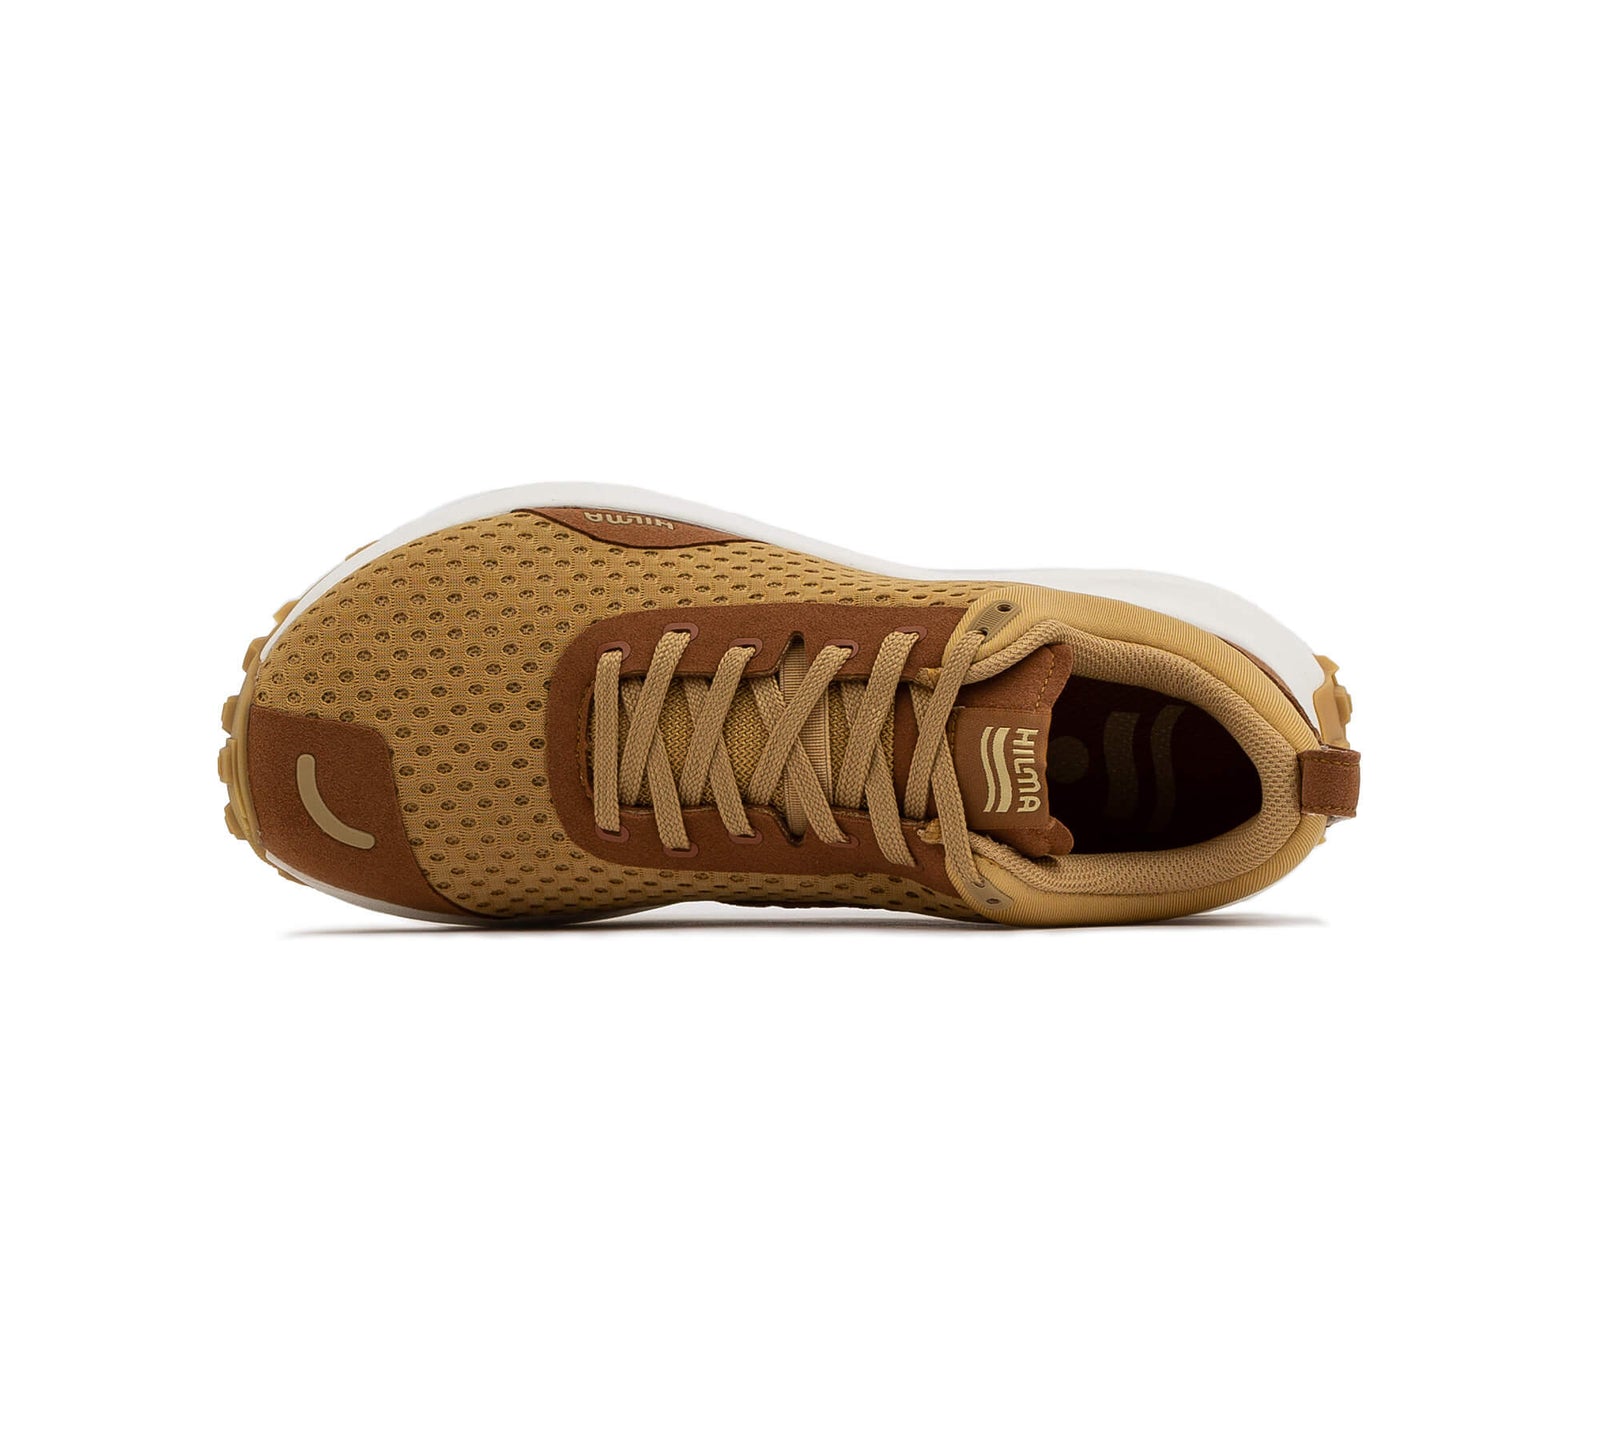 Top down view of right Everywhere Hilma Running shoe in Sandstone